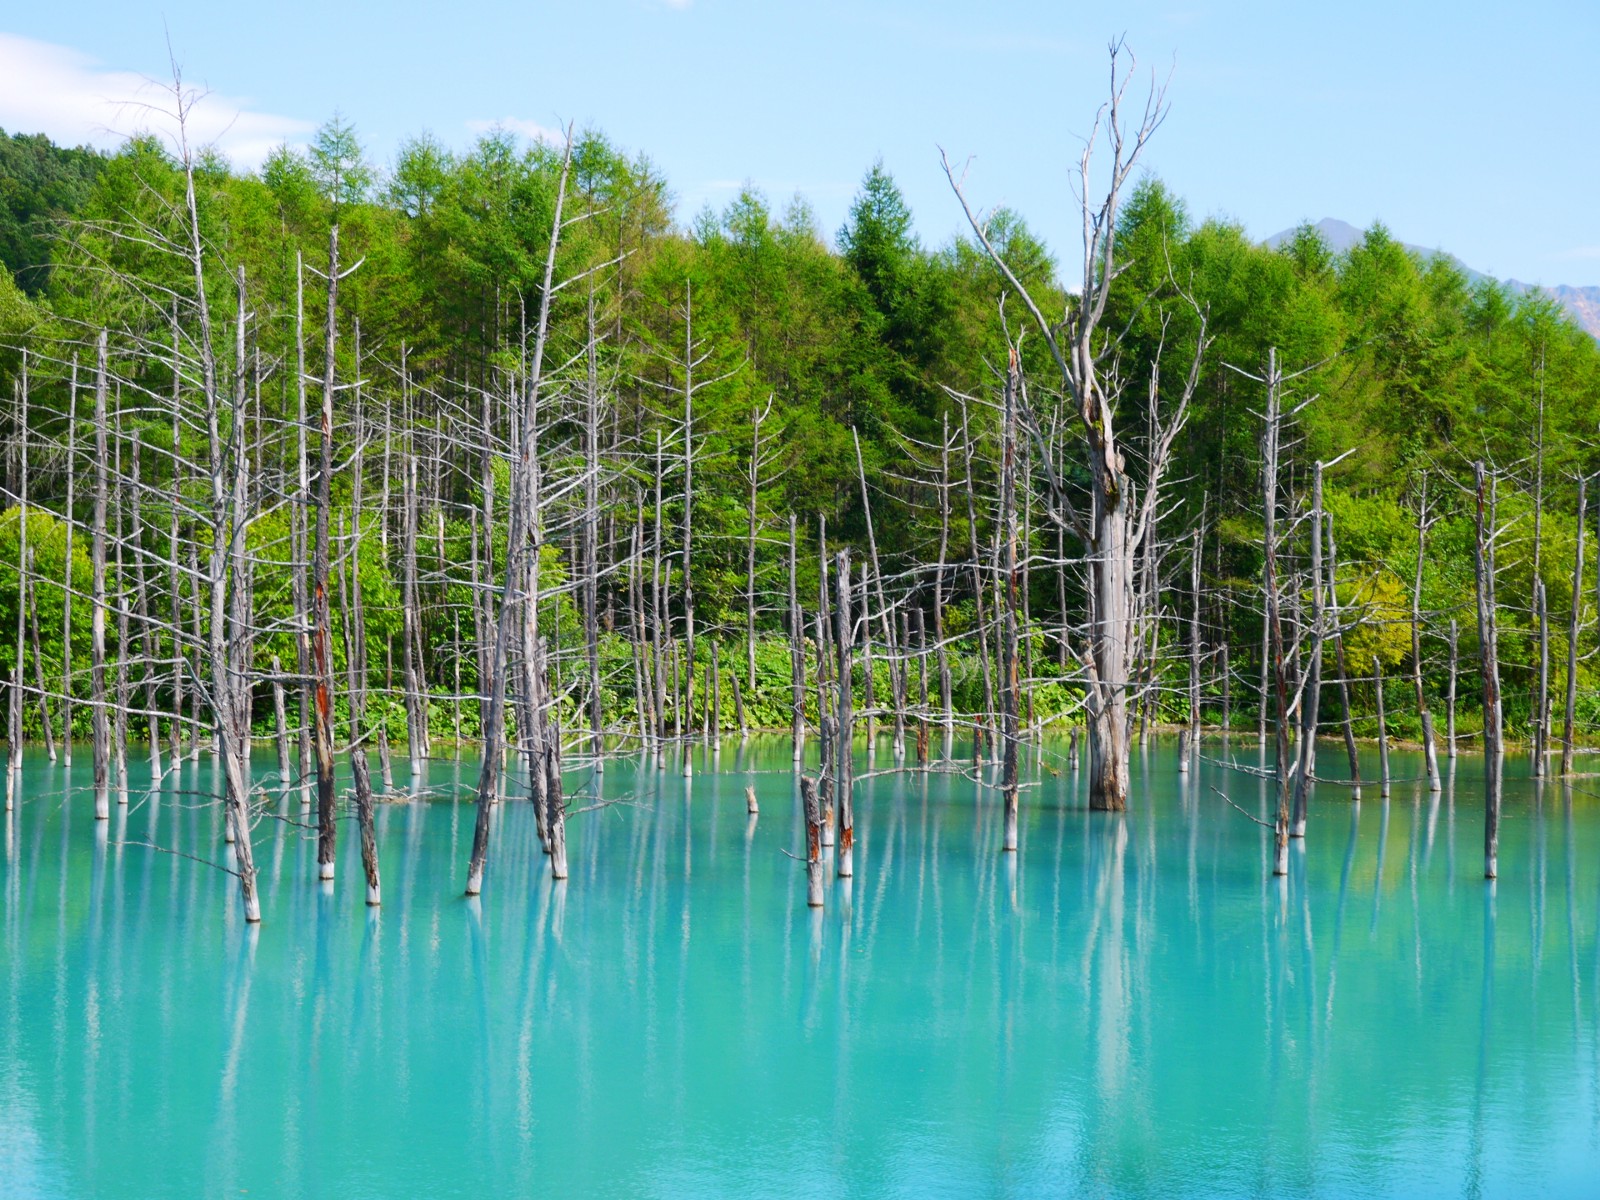 The picturesque Blue Pond in summer